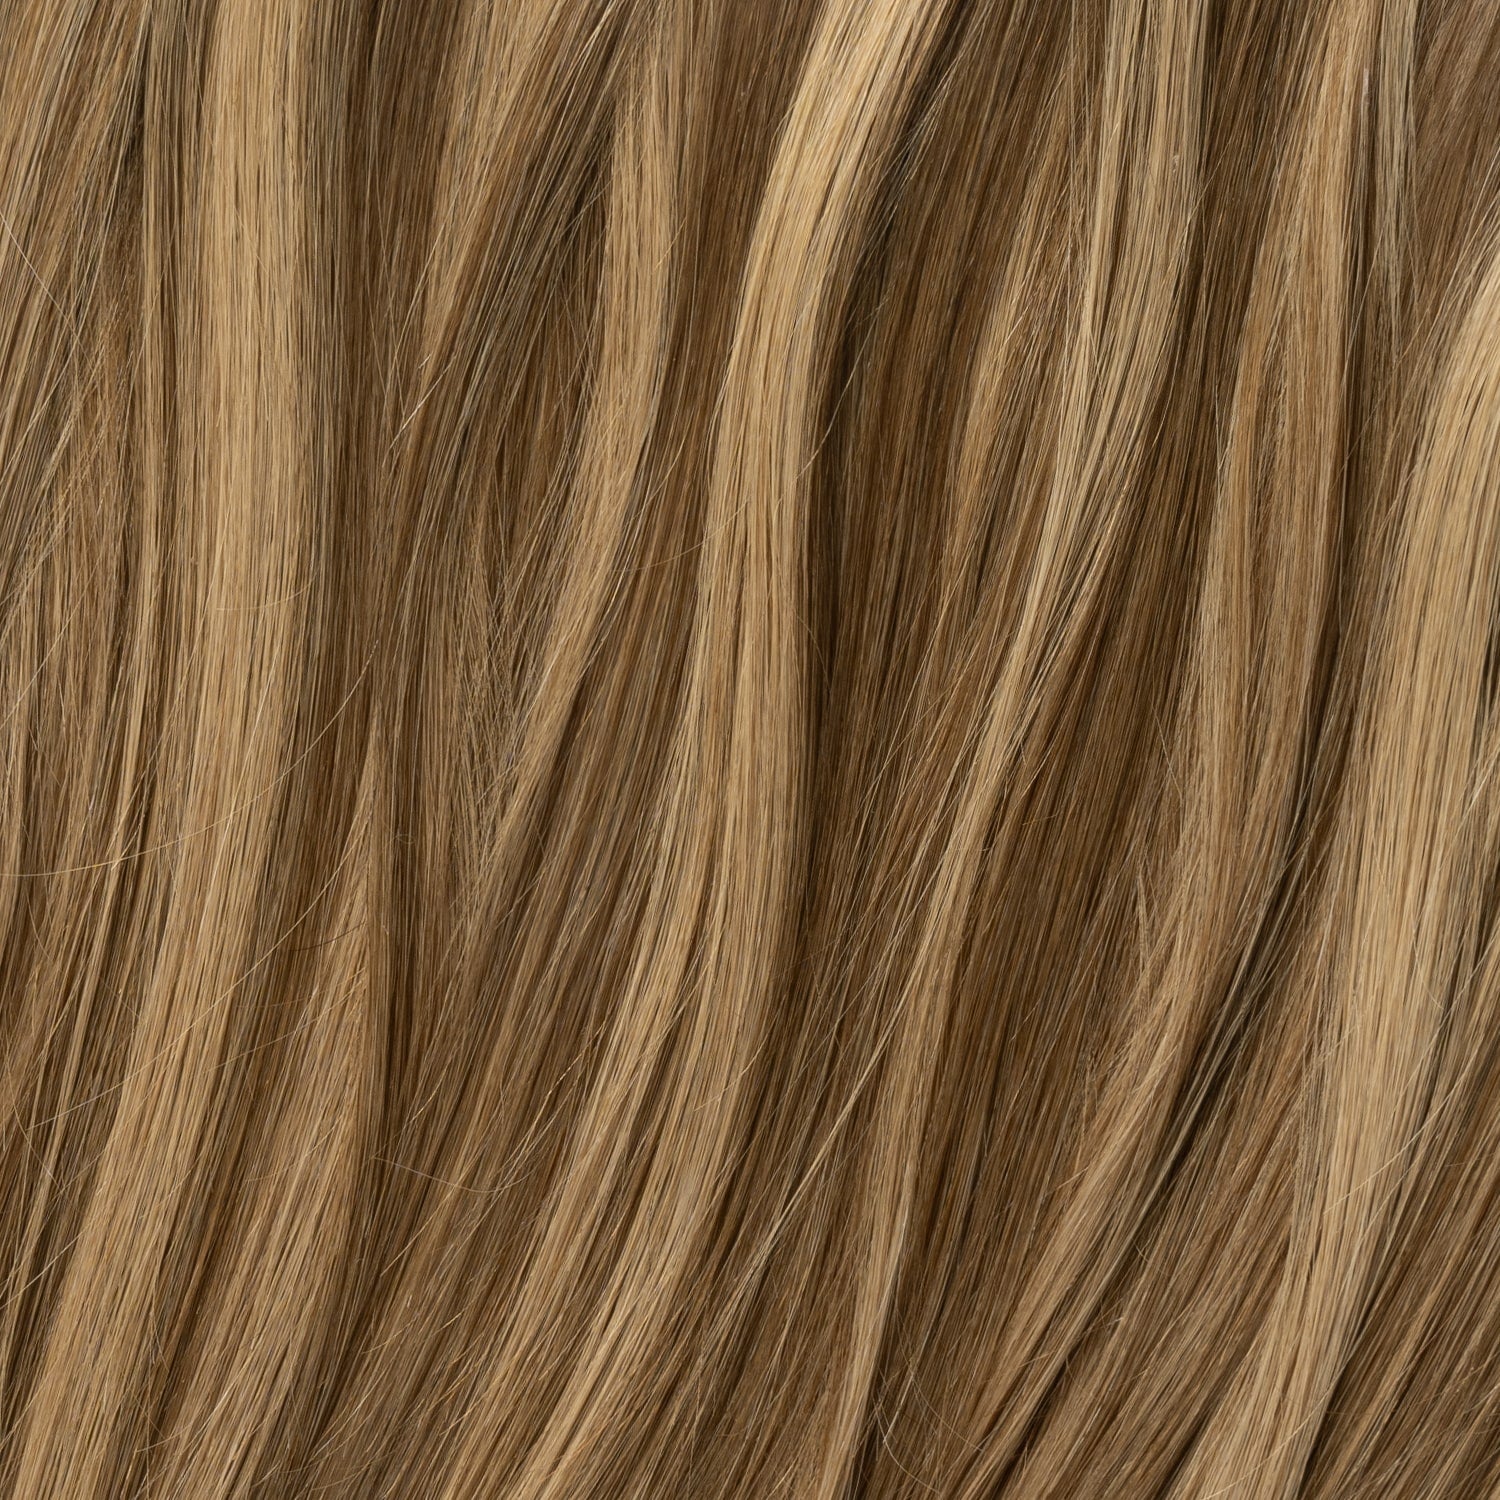 Halo extensions - Natural Brown Mix 3/10